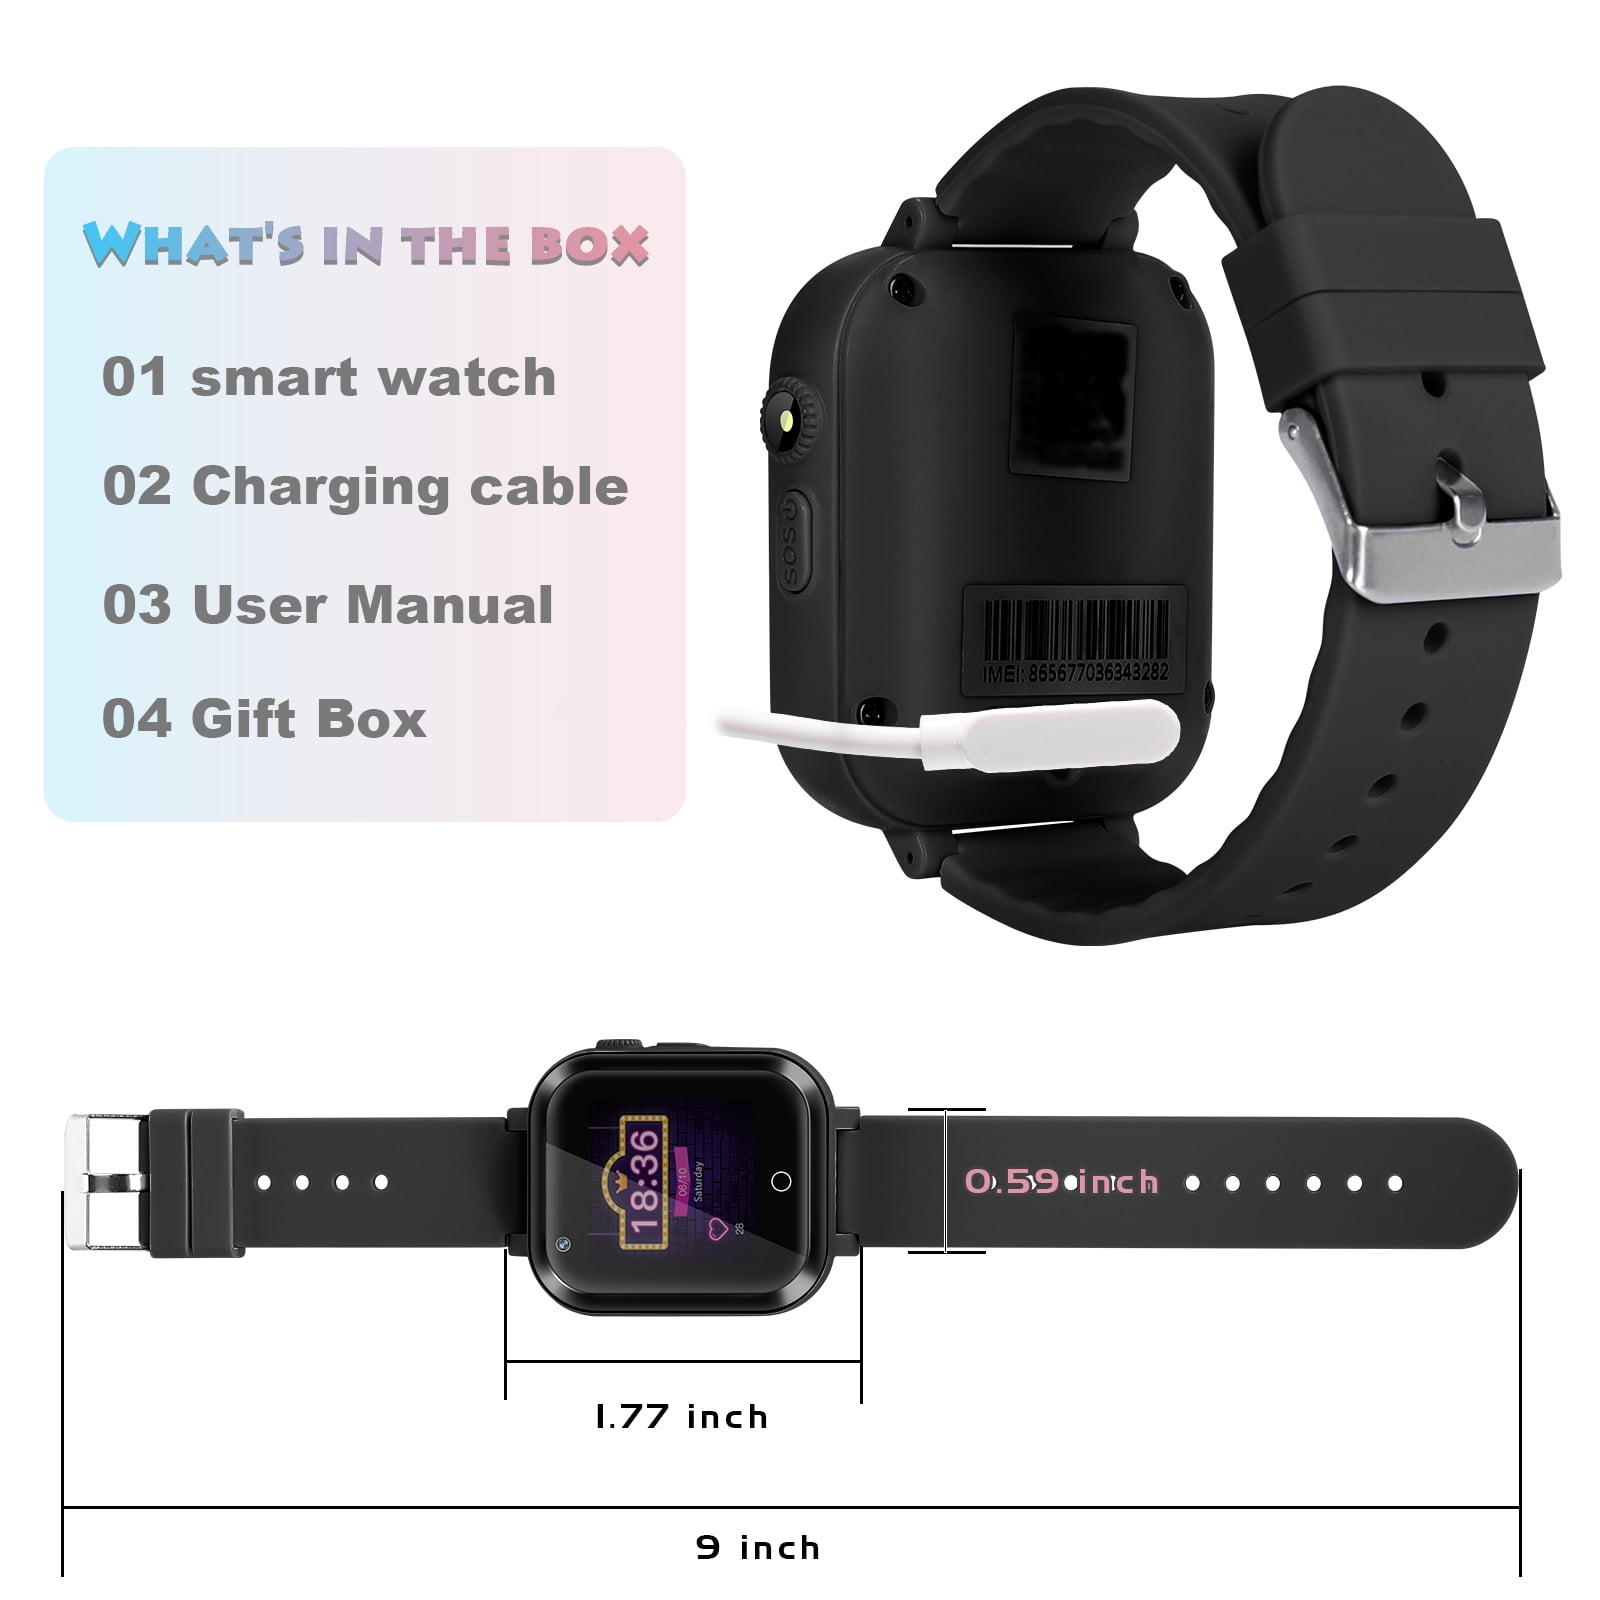 T16 4G Kids Smartwatch with GPS Tracker Texting and Calling,Smart Watch for  Kids,2 Way Call Camera Voice & Video Call SOS Alerts Smart Watch Smartphone  Cell Phone Wrist Watch,4-12 Years Girls GiftsC 